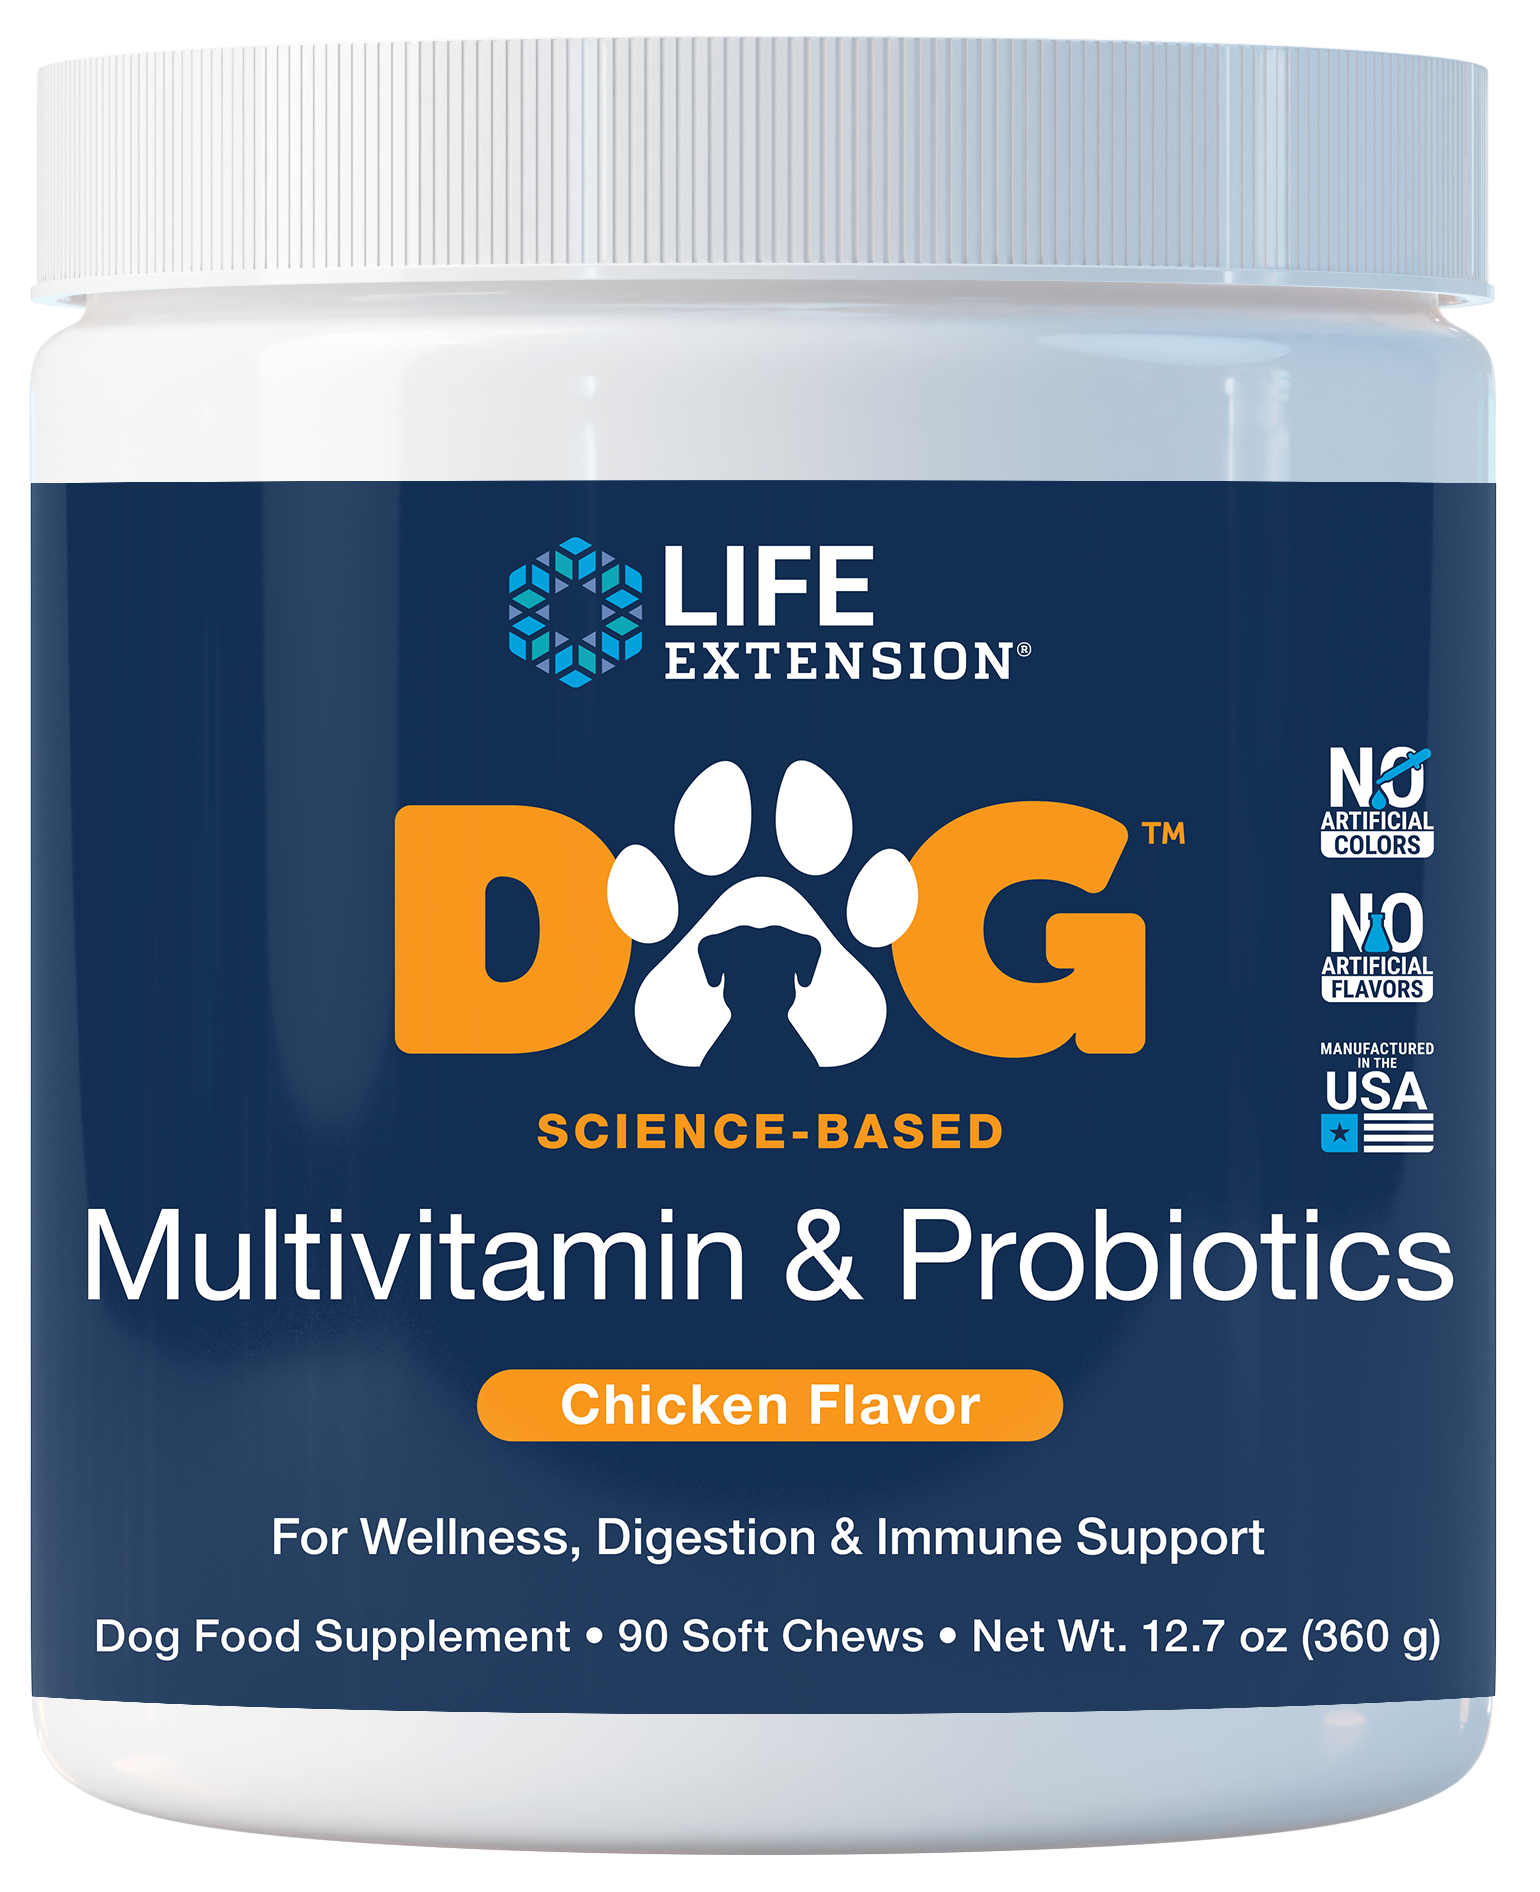 DOG Multivitamin & Probiotics is 90 soft chews with chicken flavor for the dogs' overall, immune, and digestive health